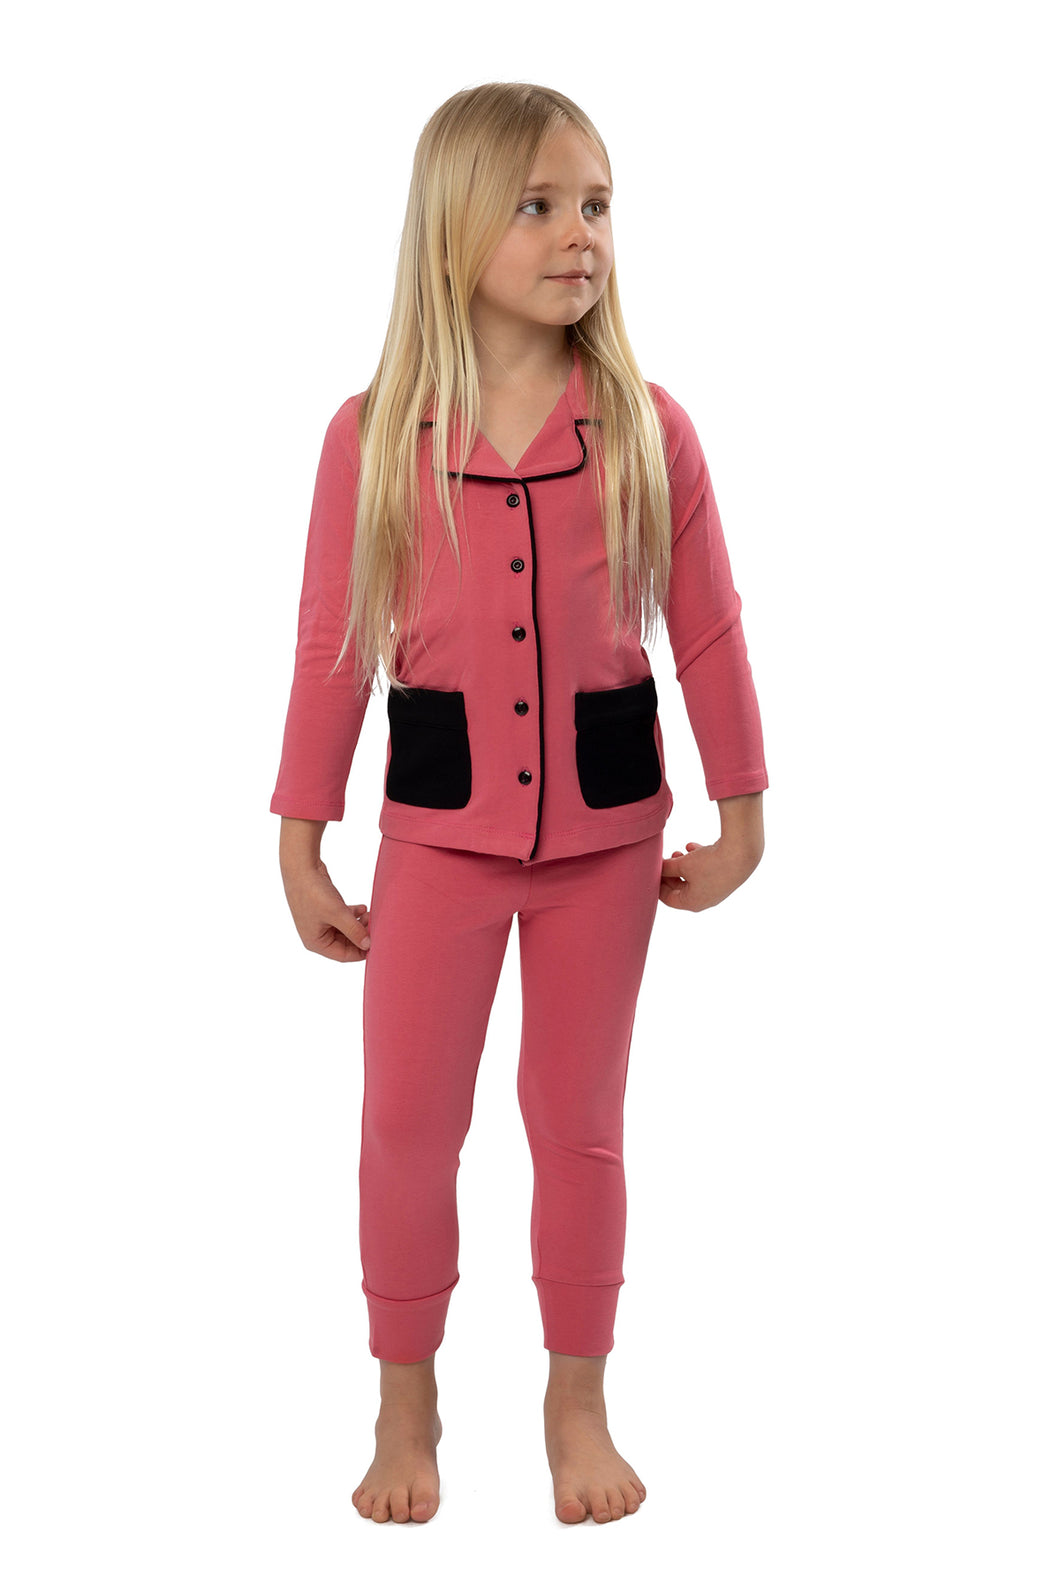 Pajamas For Kids | Pink Classy Heavy Cotton Button Front